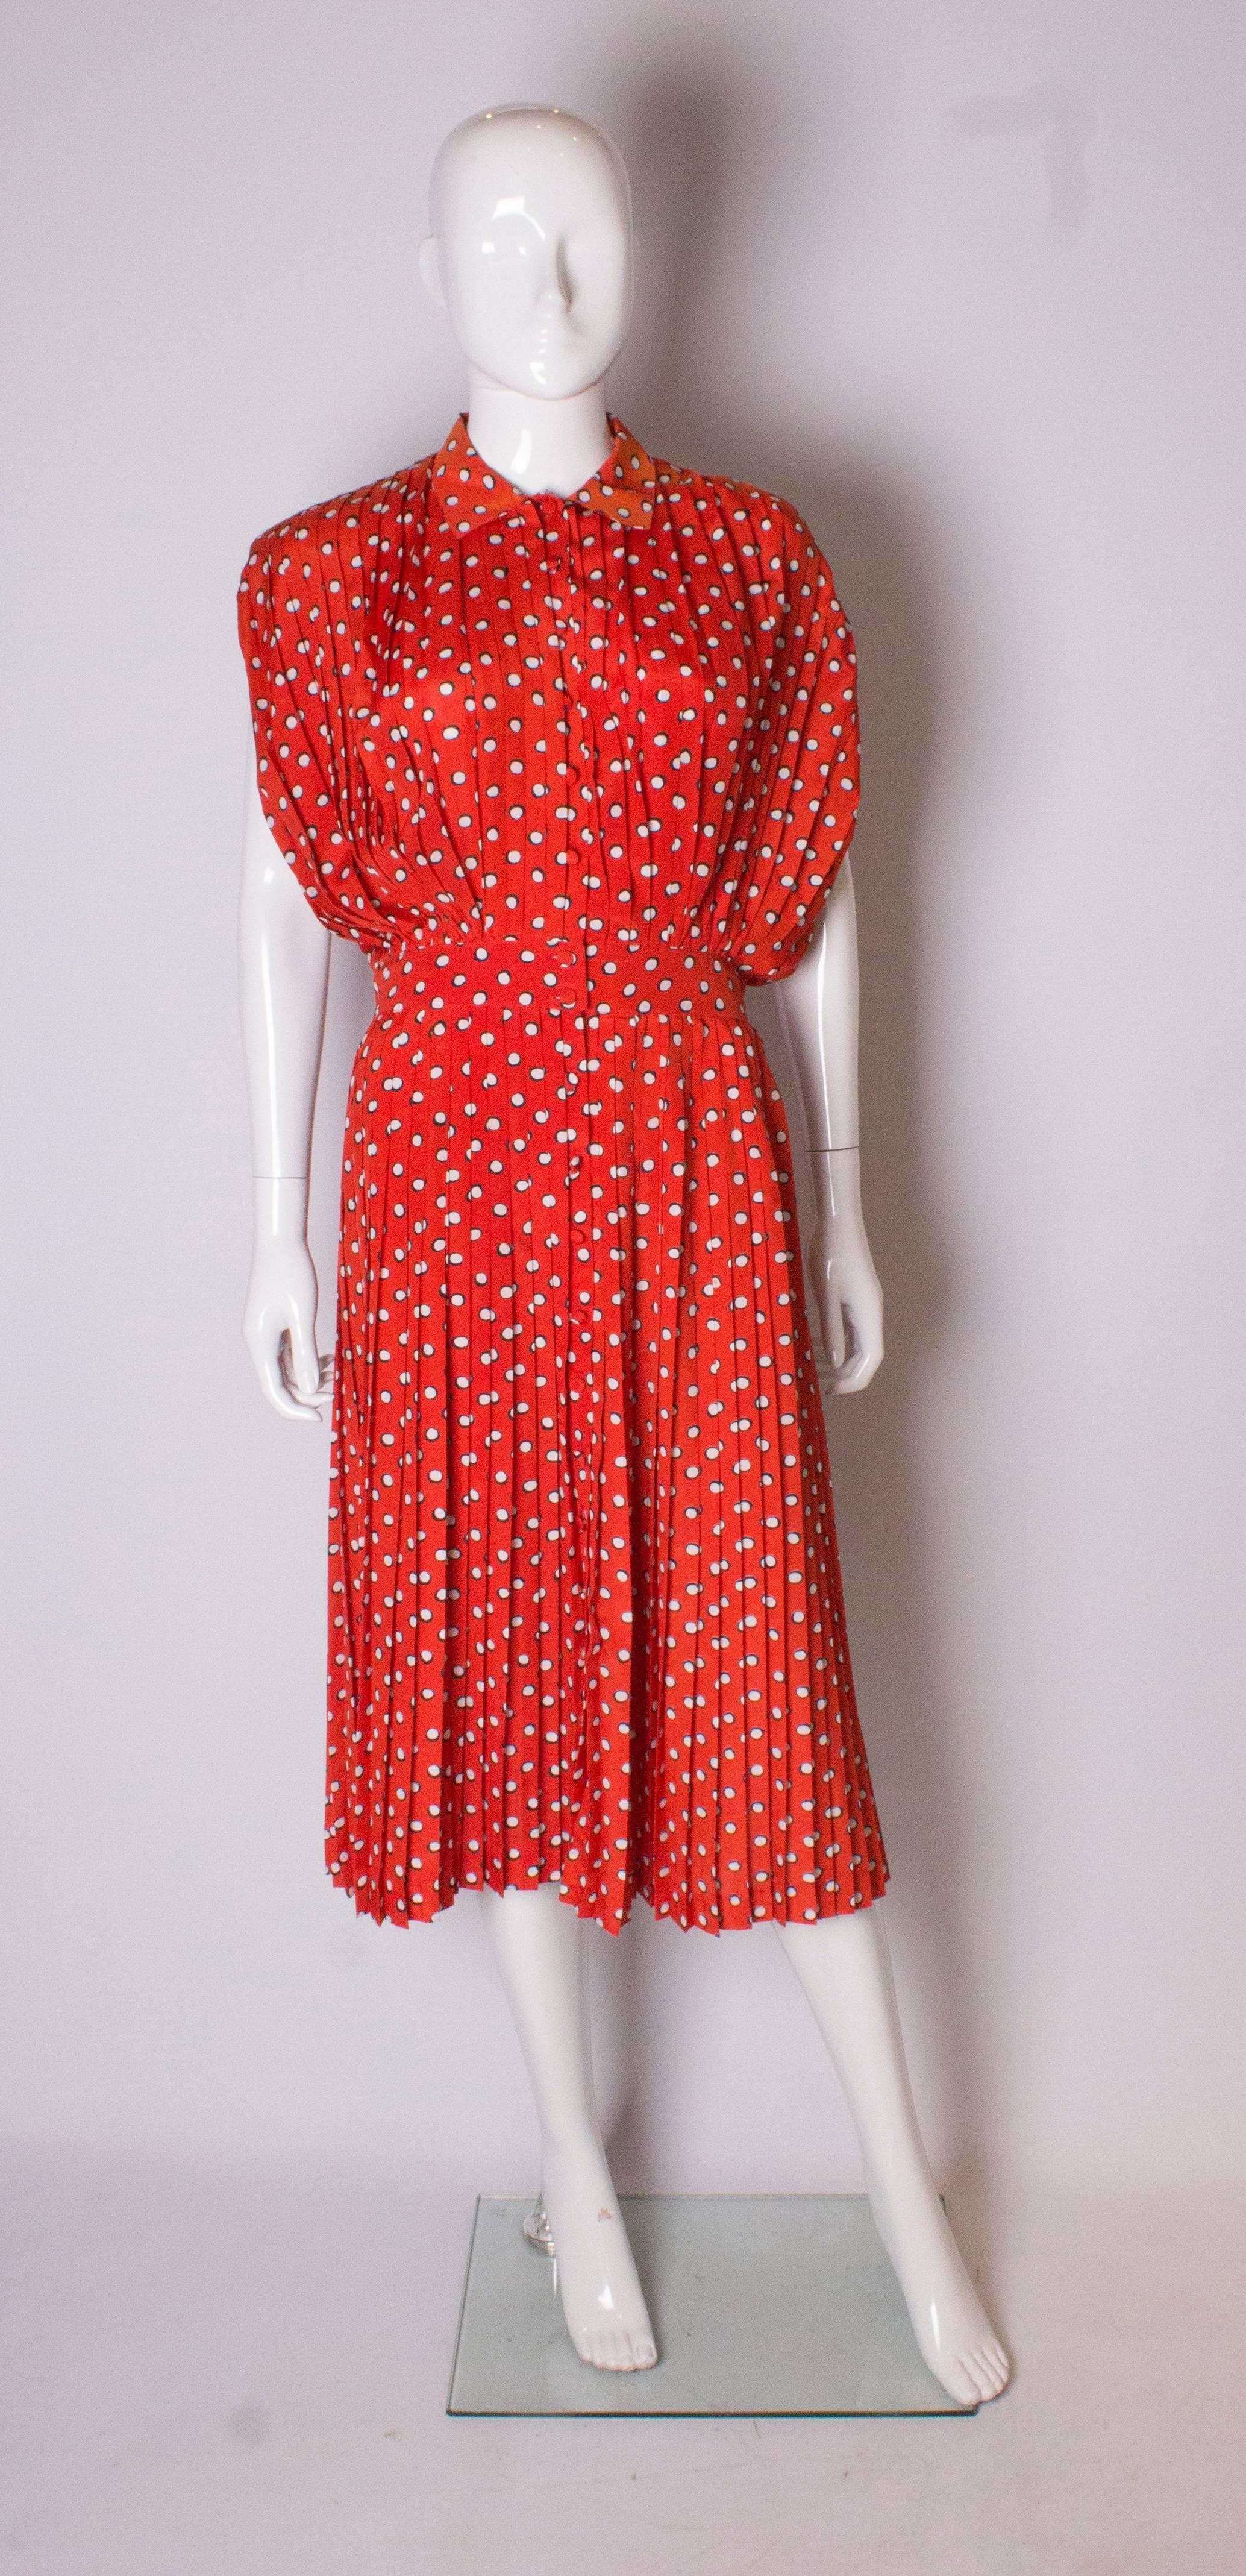 A great dress by Georges Rechs. The dress is pleated wiht a button front opening. The fabric has a red background with blakc and white spots.